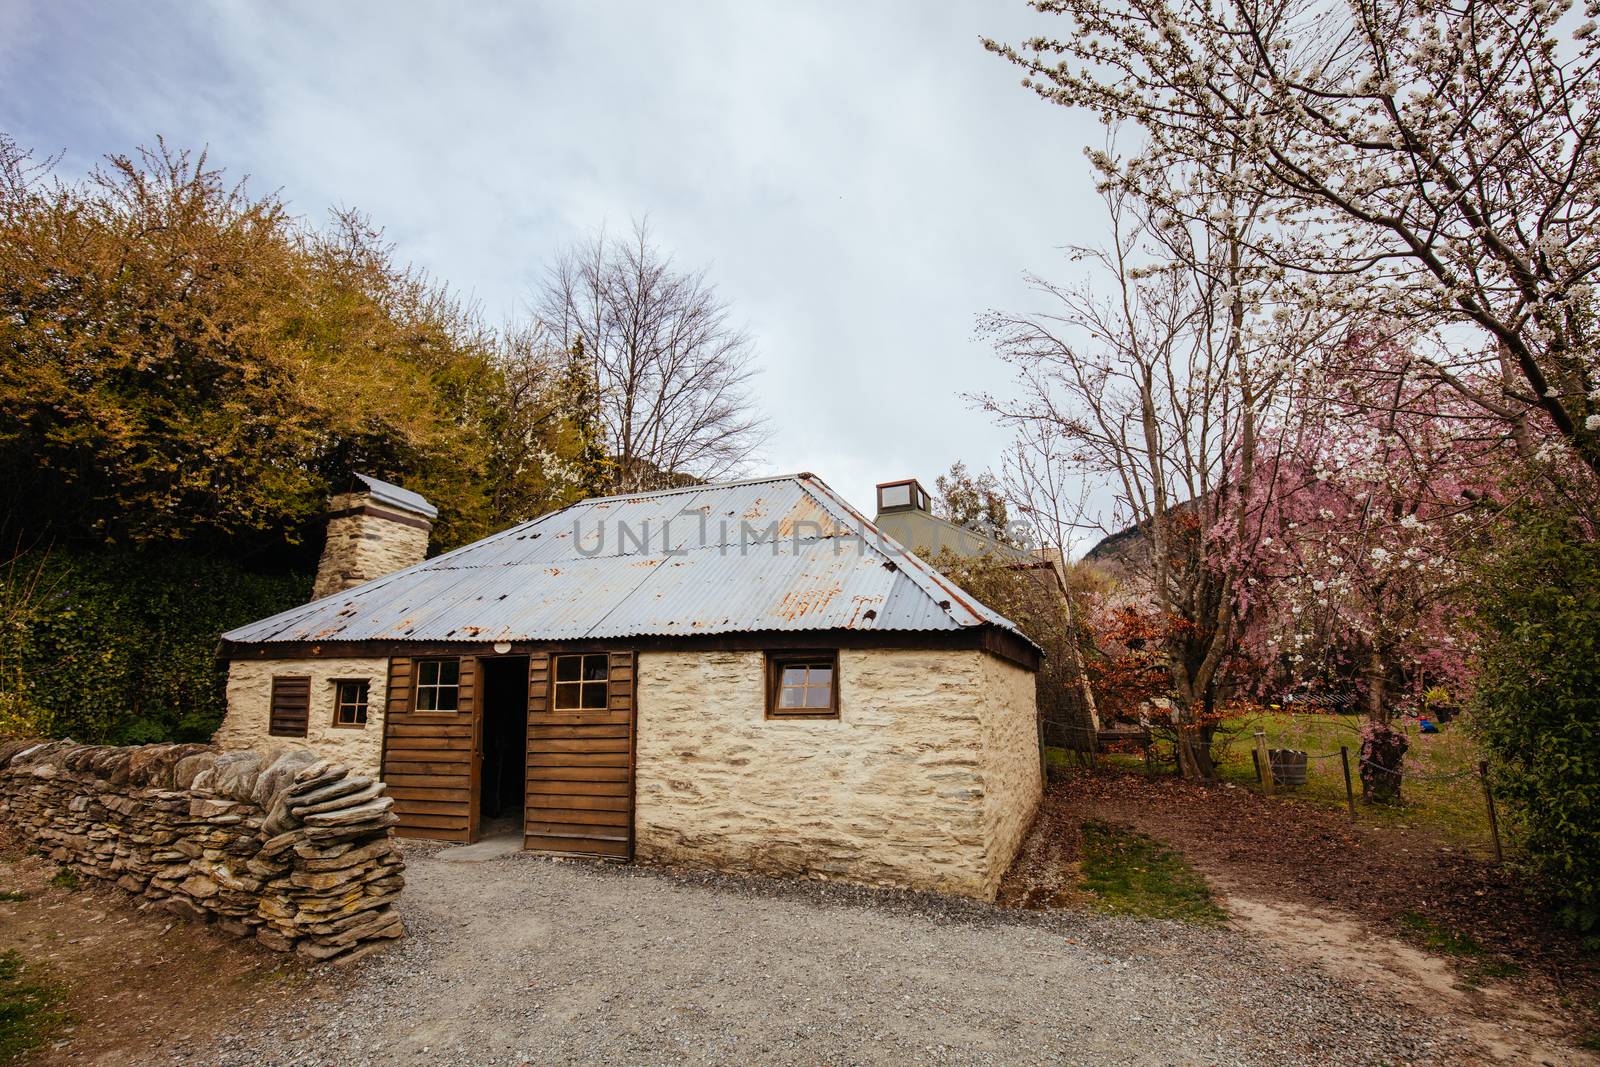 The historic Chinese settlement in the ancient gold mining town of Arrowtown in New Zealand